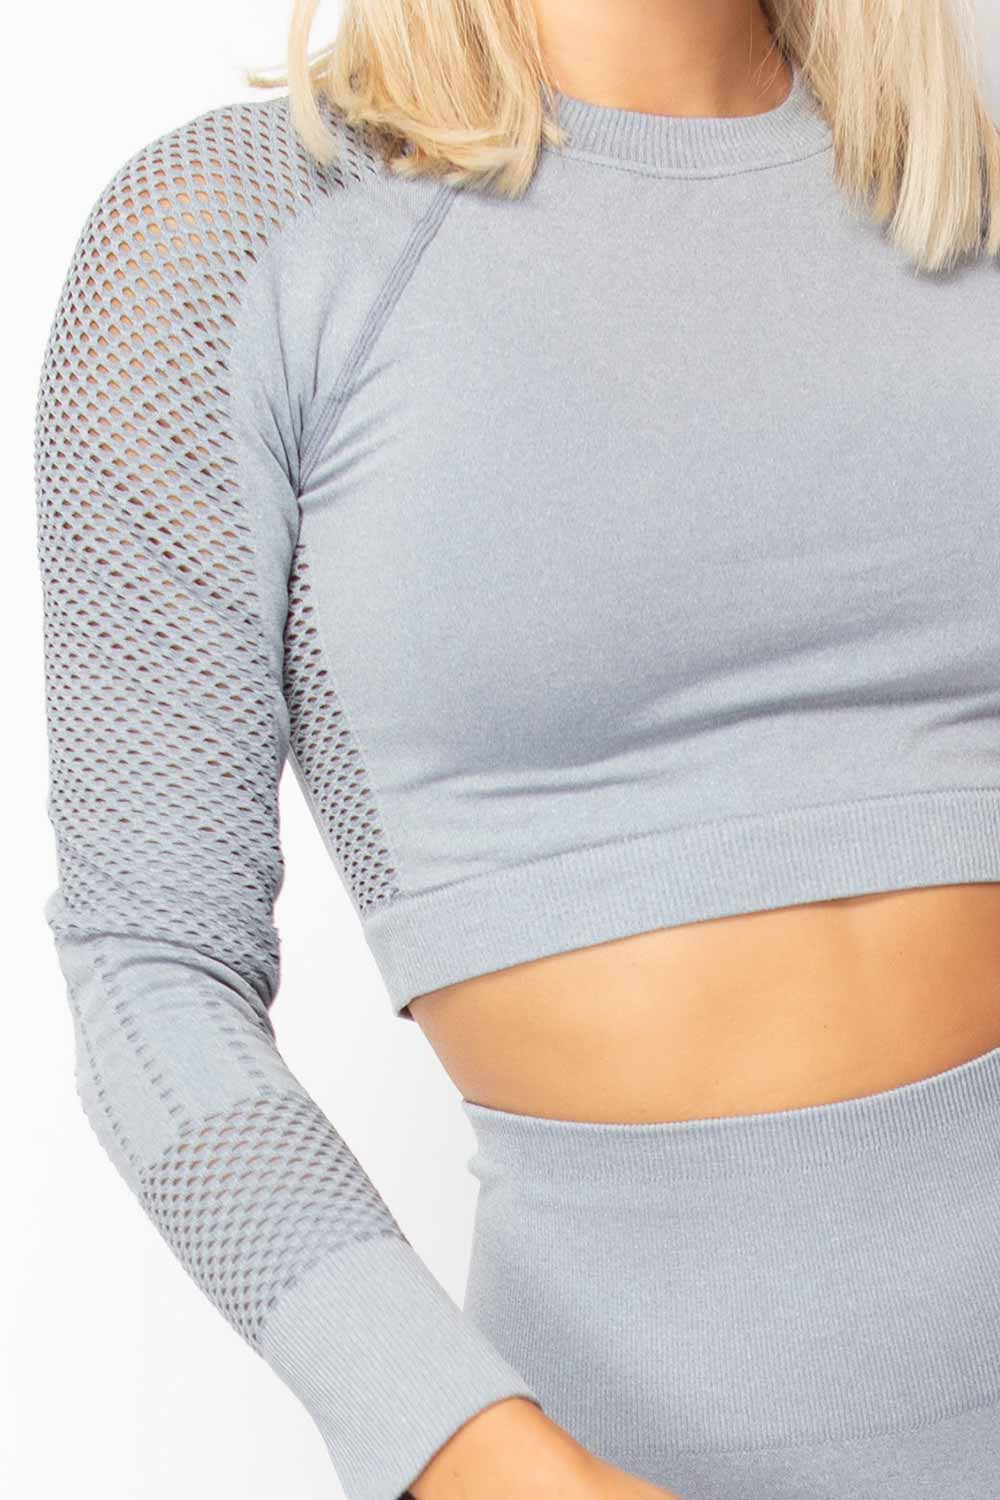 grey fitness top womens 